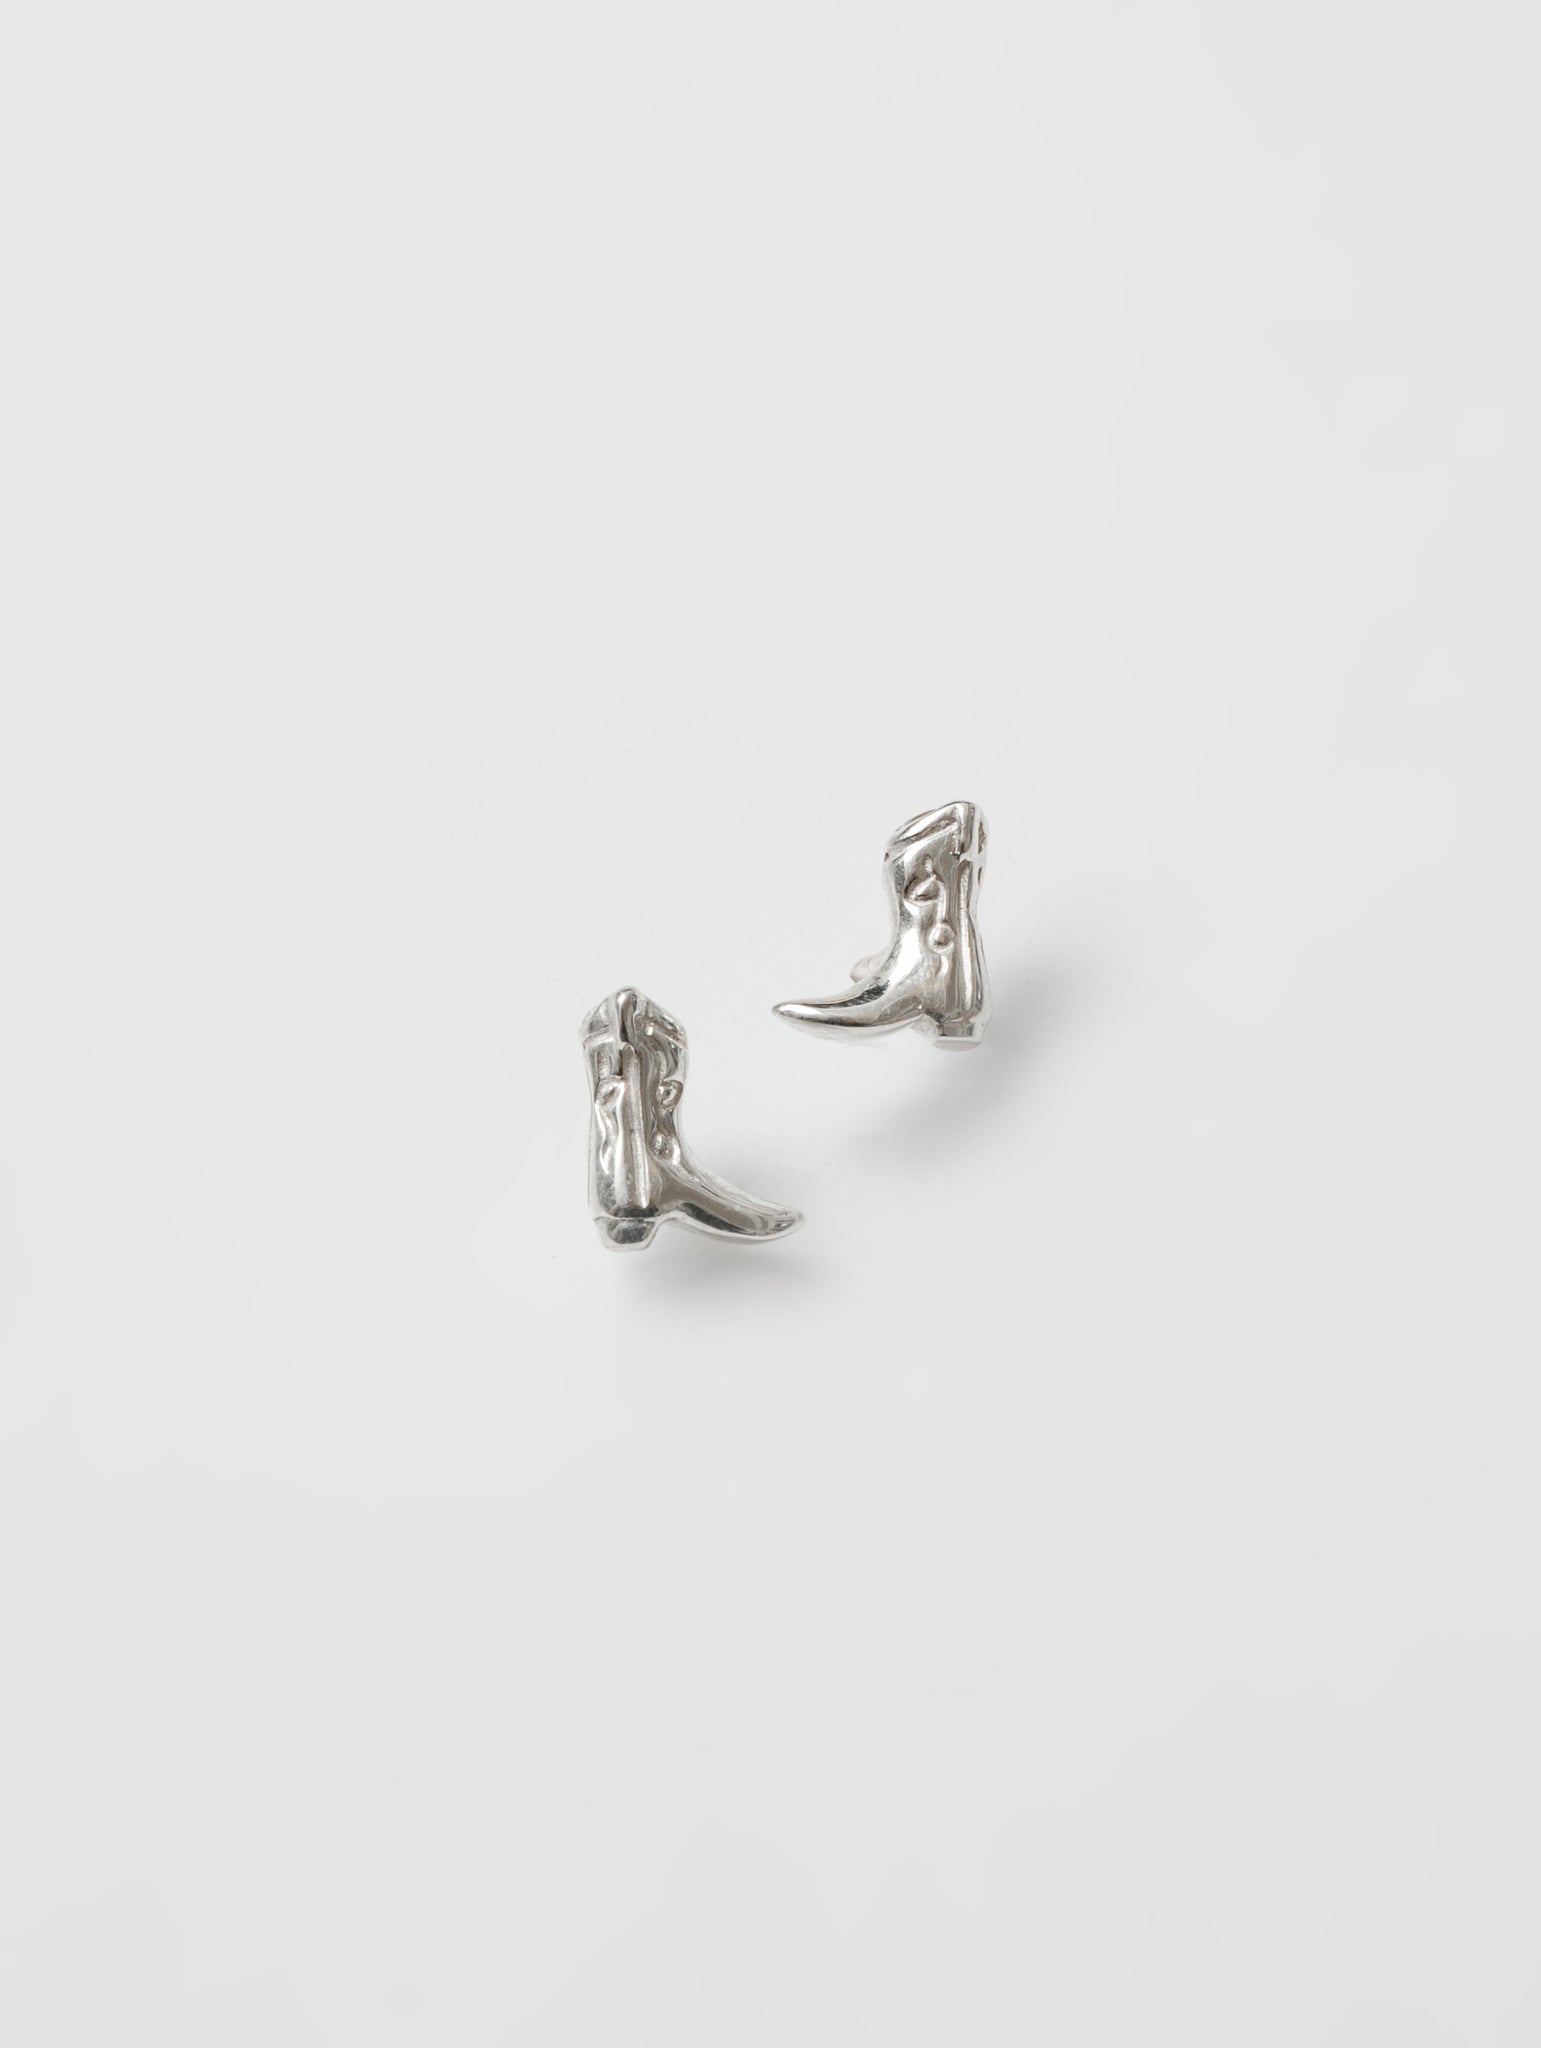 Cowboy Boot Charm Studs Sterling Silver TBL